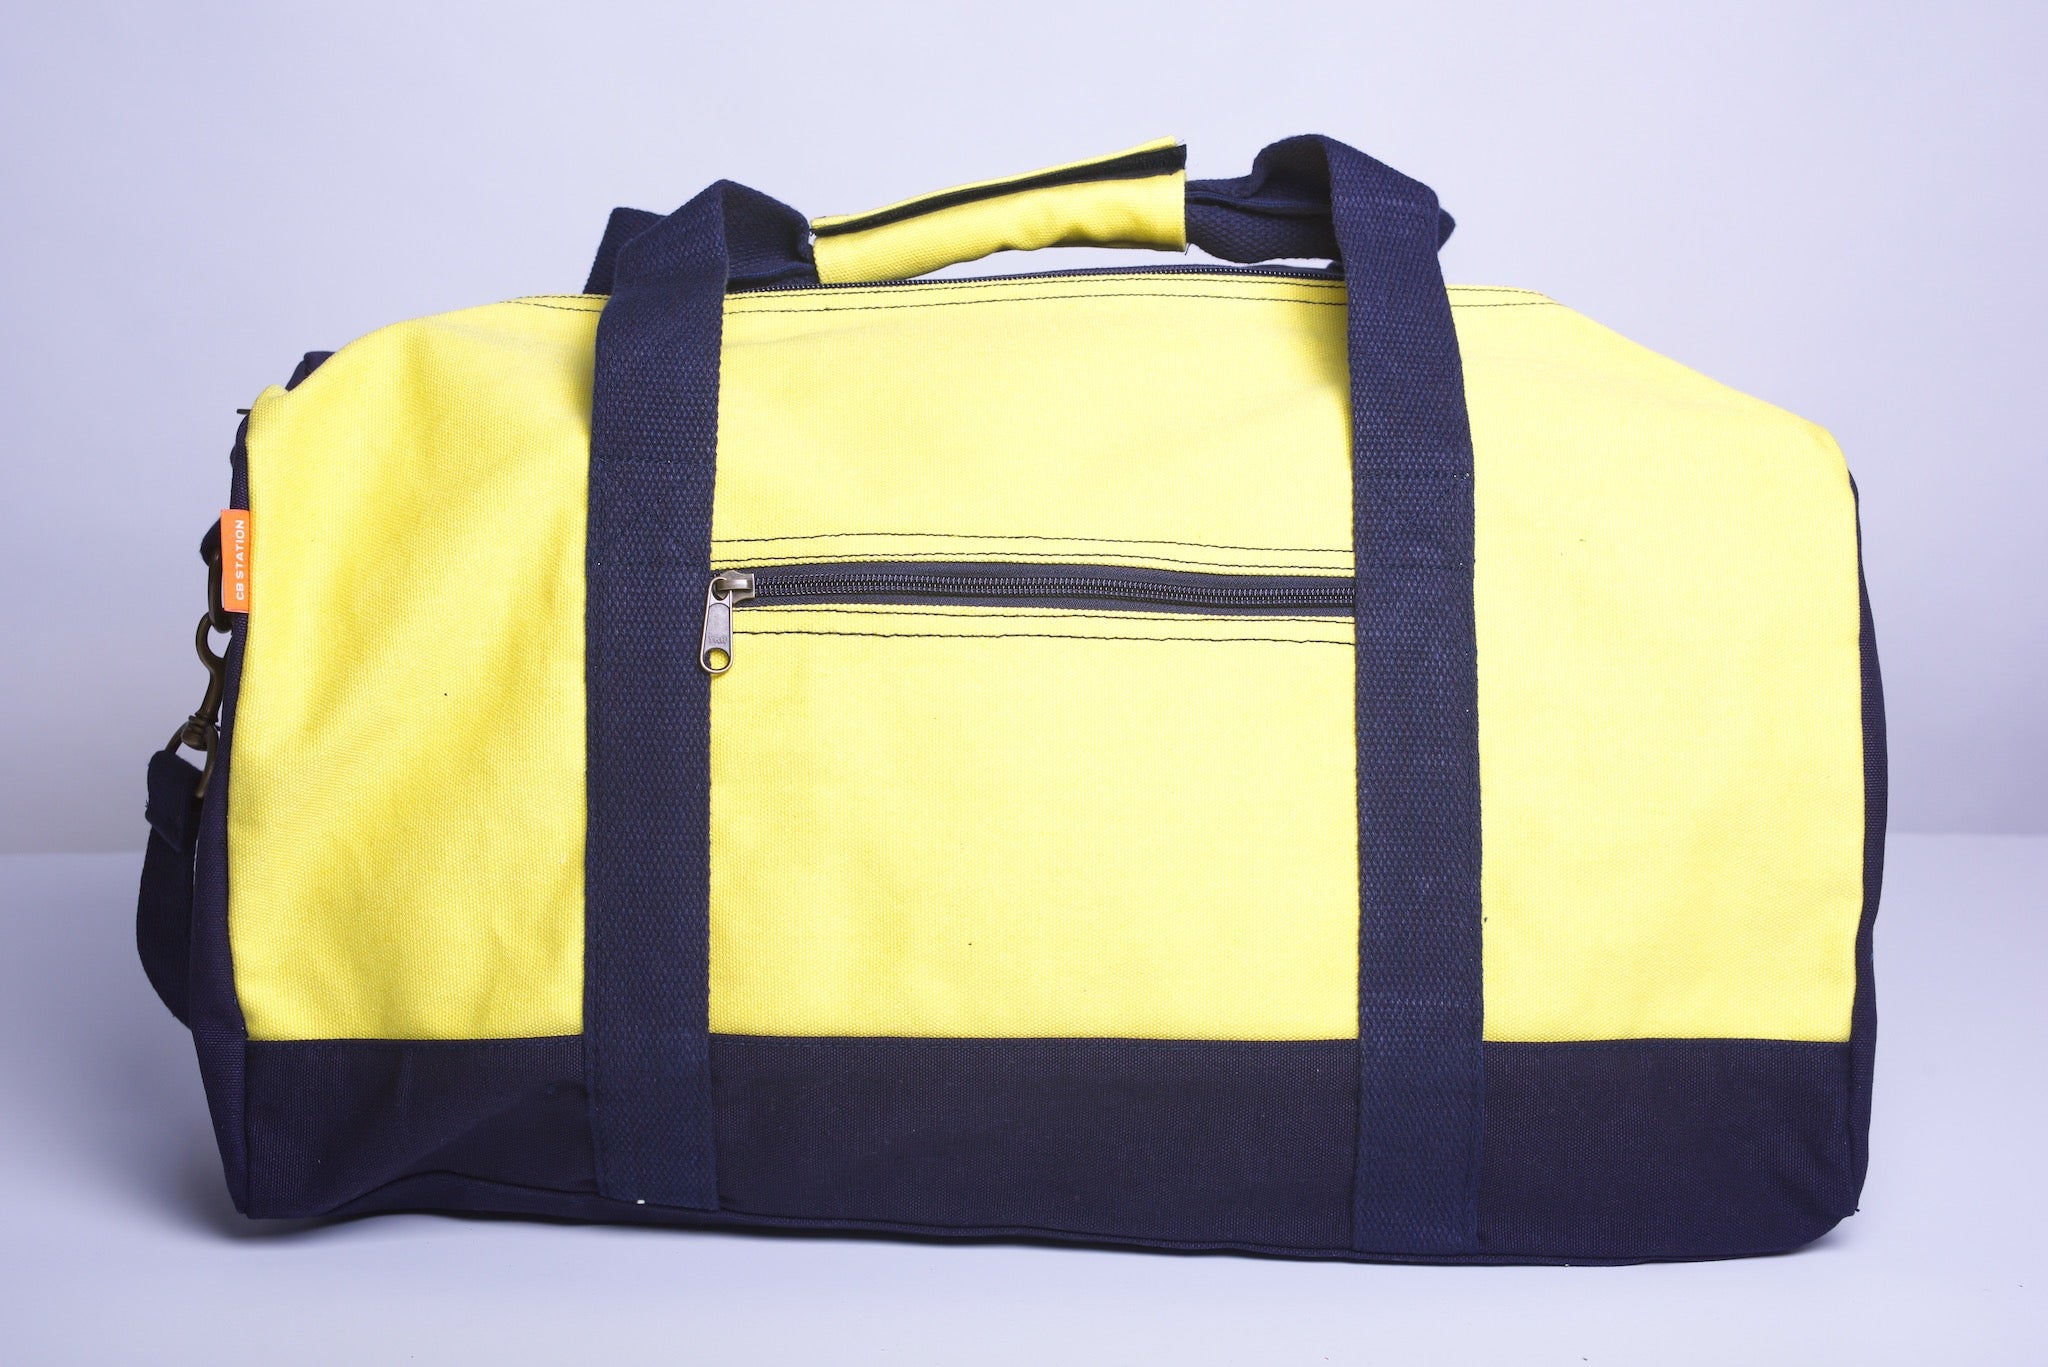 Carry Daily Duffle Bag